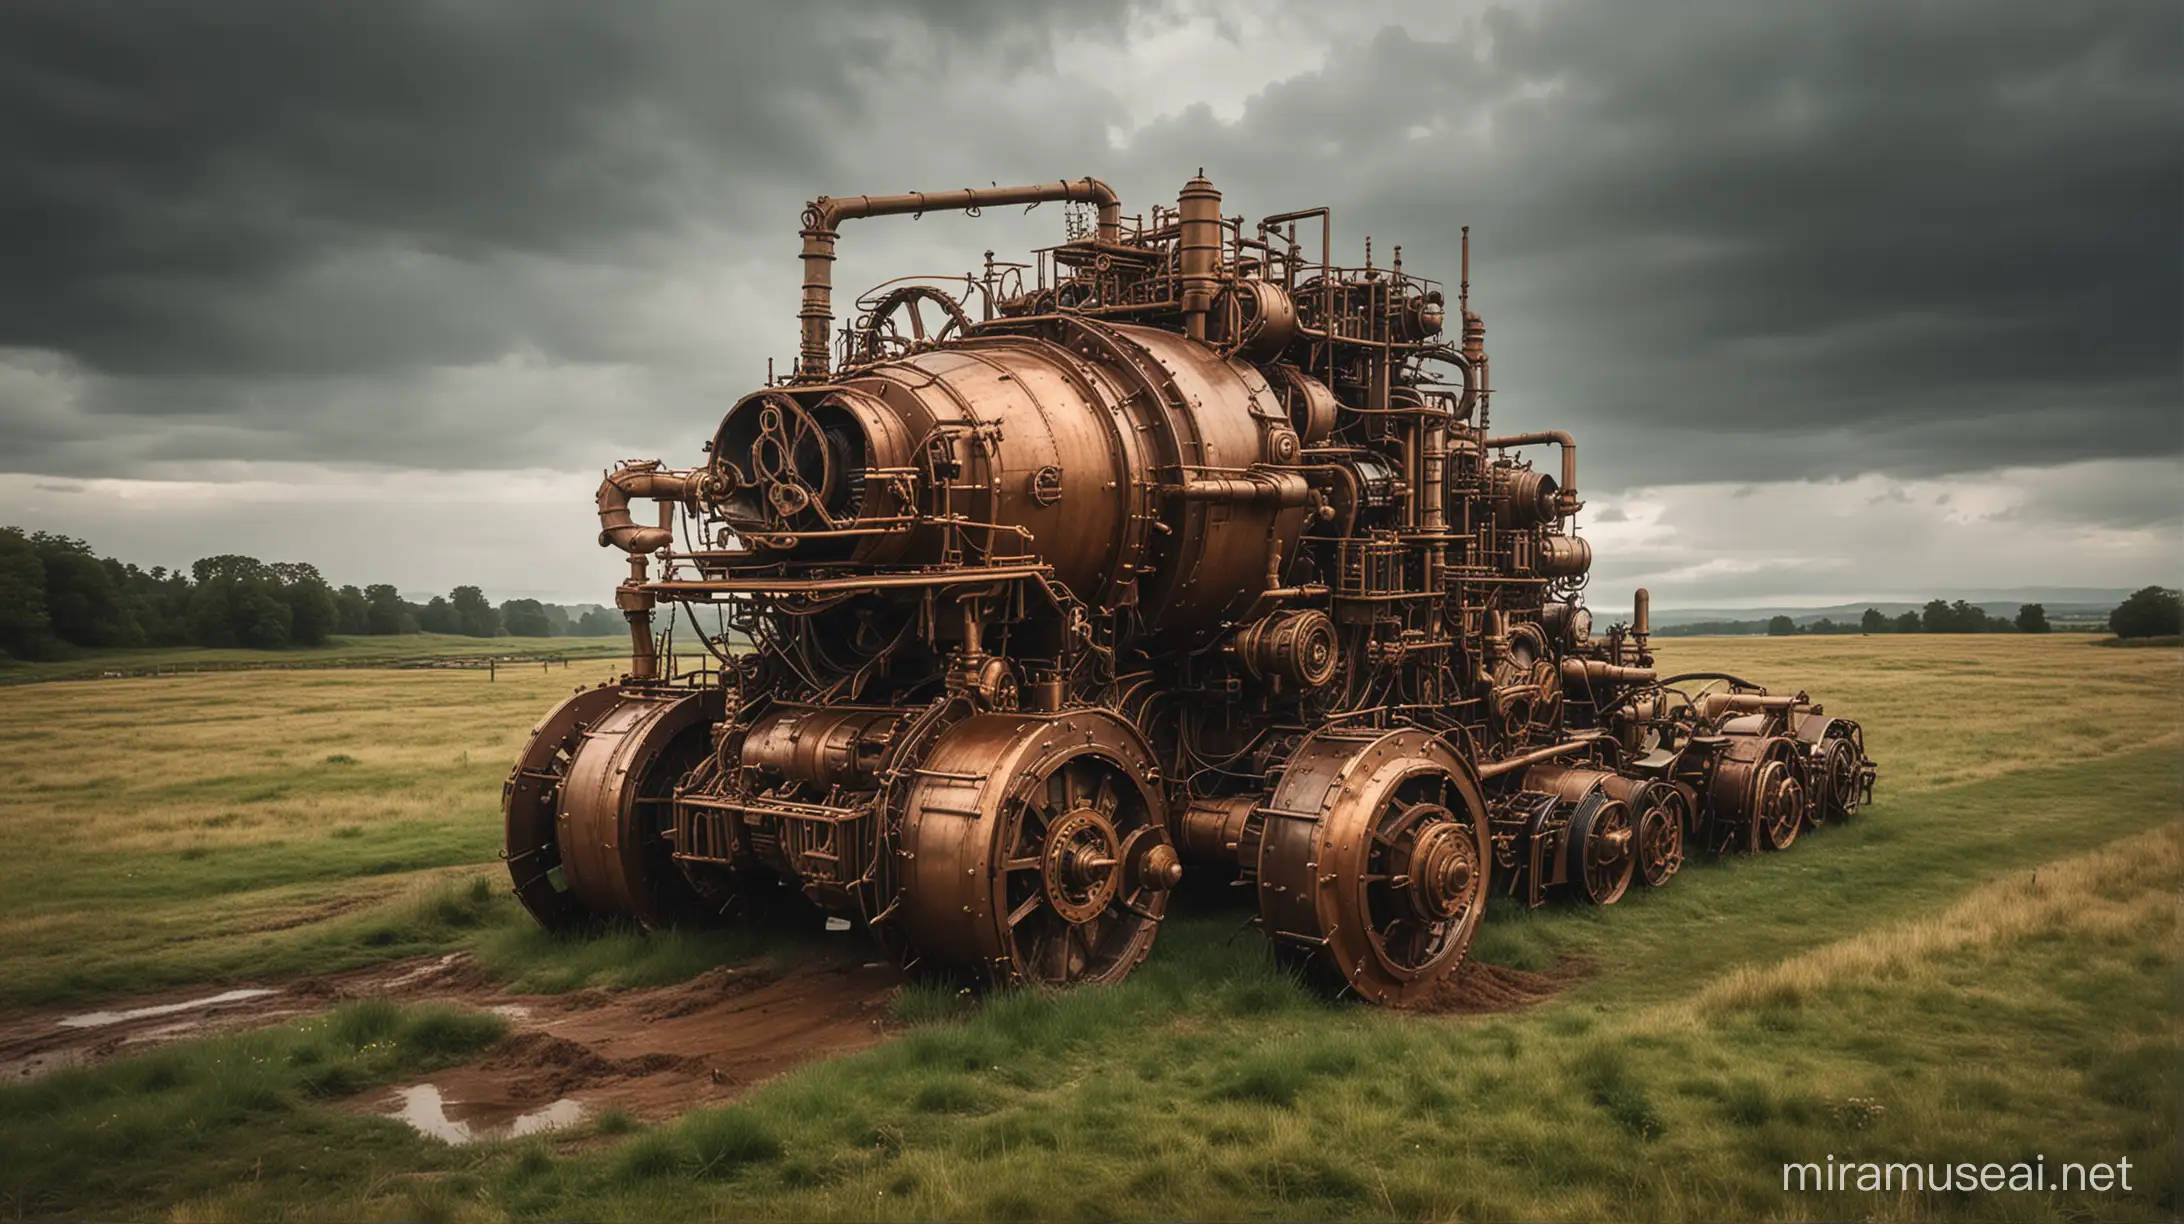 very big steampunk machine makes a deep excavation on a meadow, machine made of copper, steel and brass, cloudy and rainy